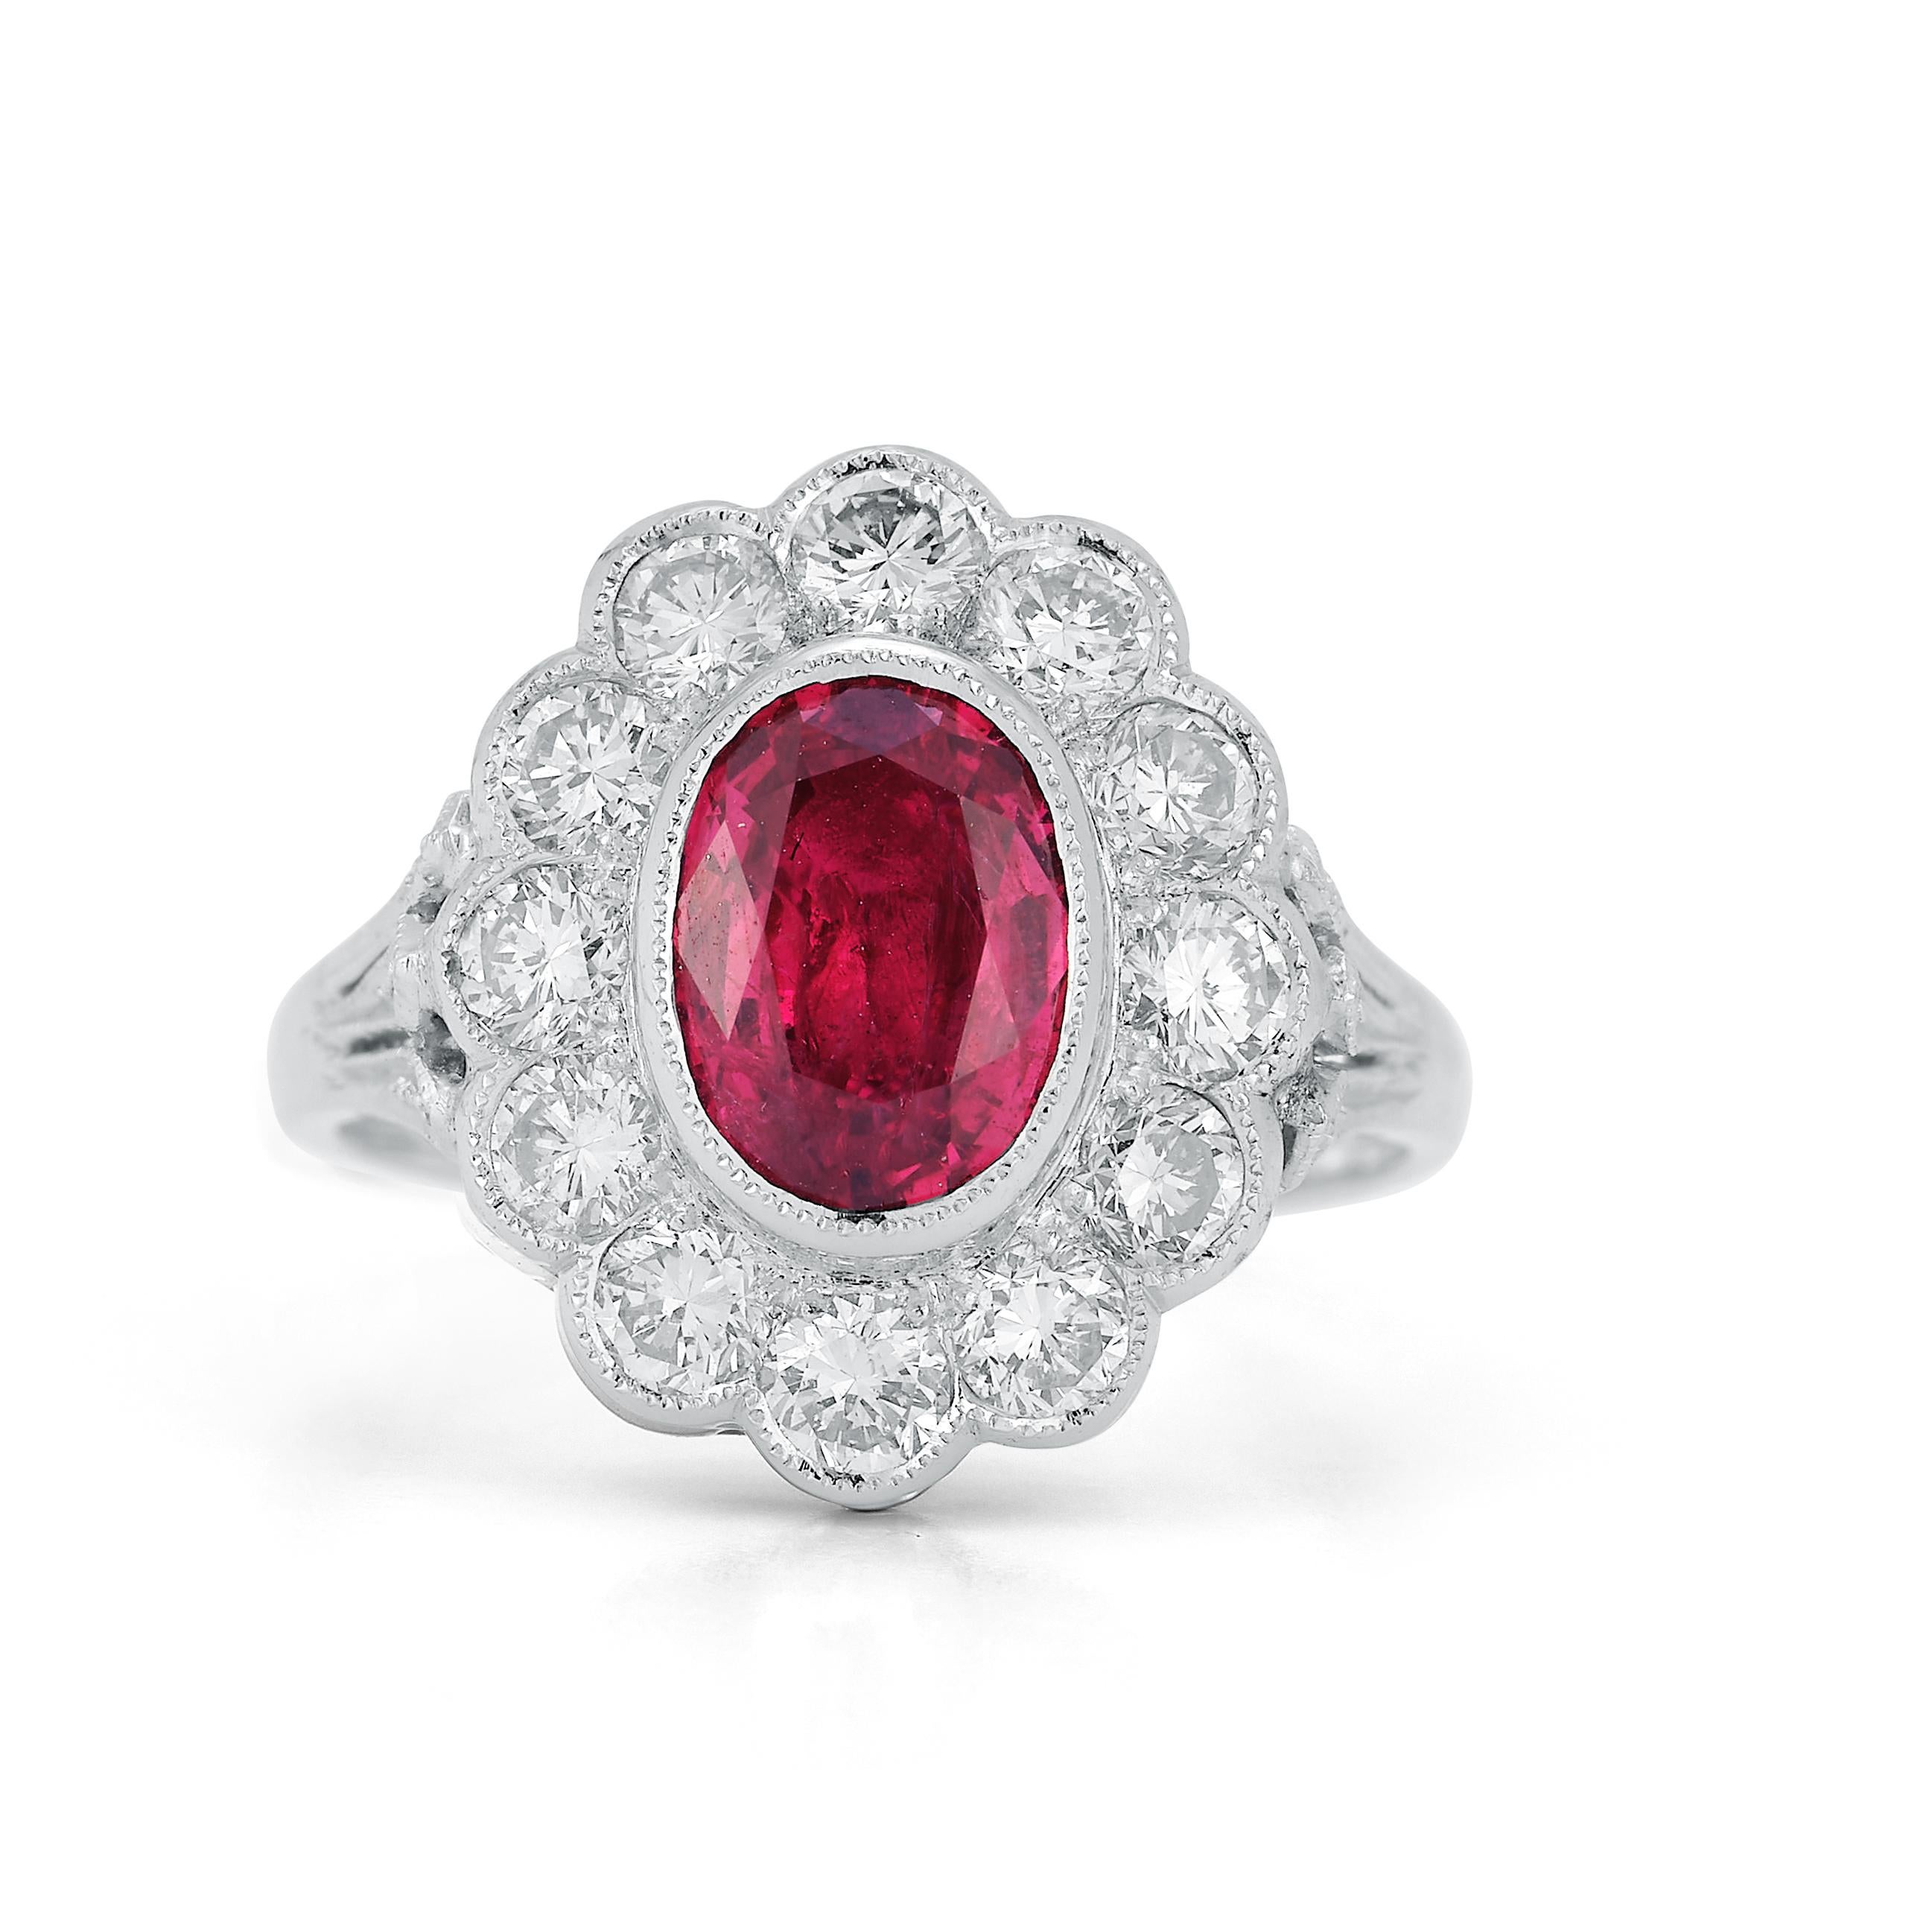 Oval Cut Rubellite & Diamond Flower Ring

 18K white gold ring with center oval rubellite approximately 1.04 ct surrounded by 12 brilliant diamonds approximately 1.20 ct

Ring Size: 5.75